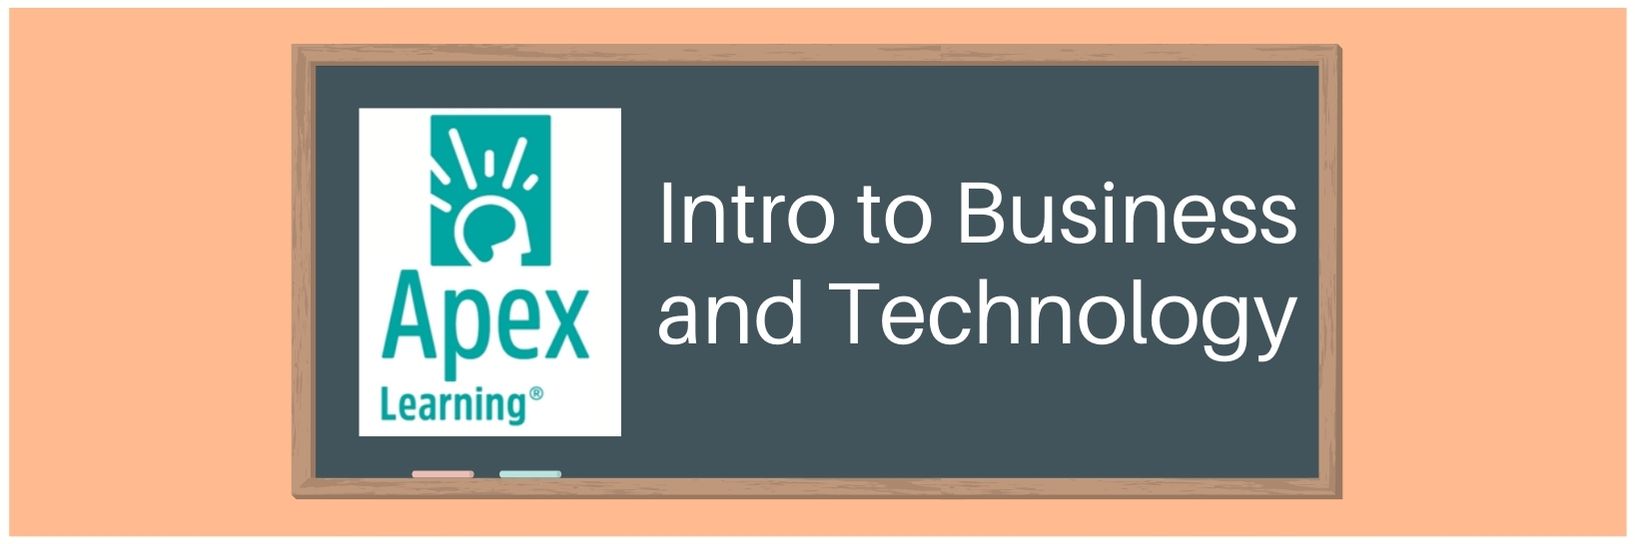 Introduction to Business and Technology: A Review of Apex Learning